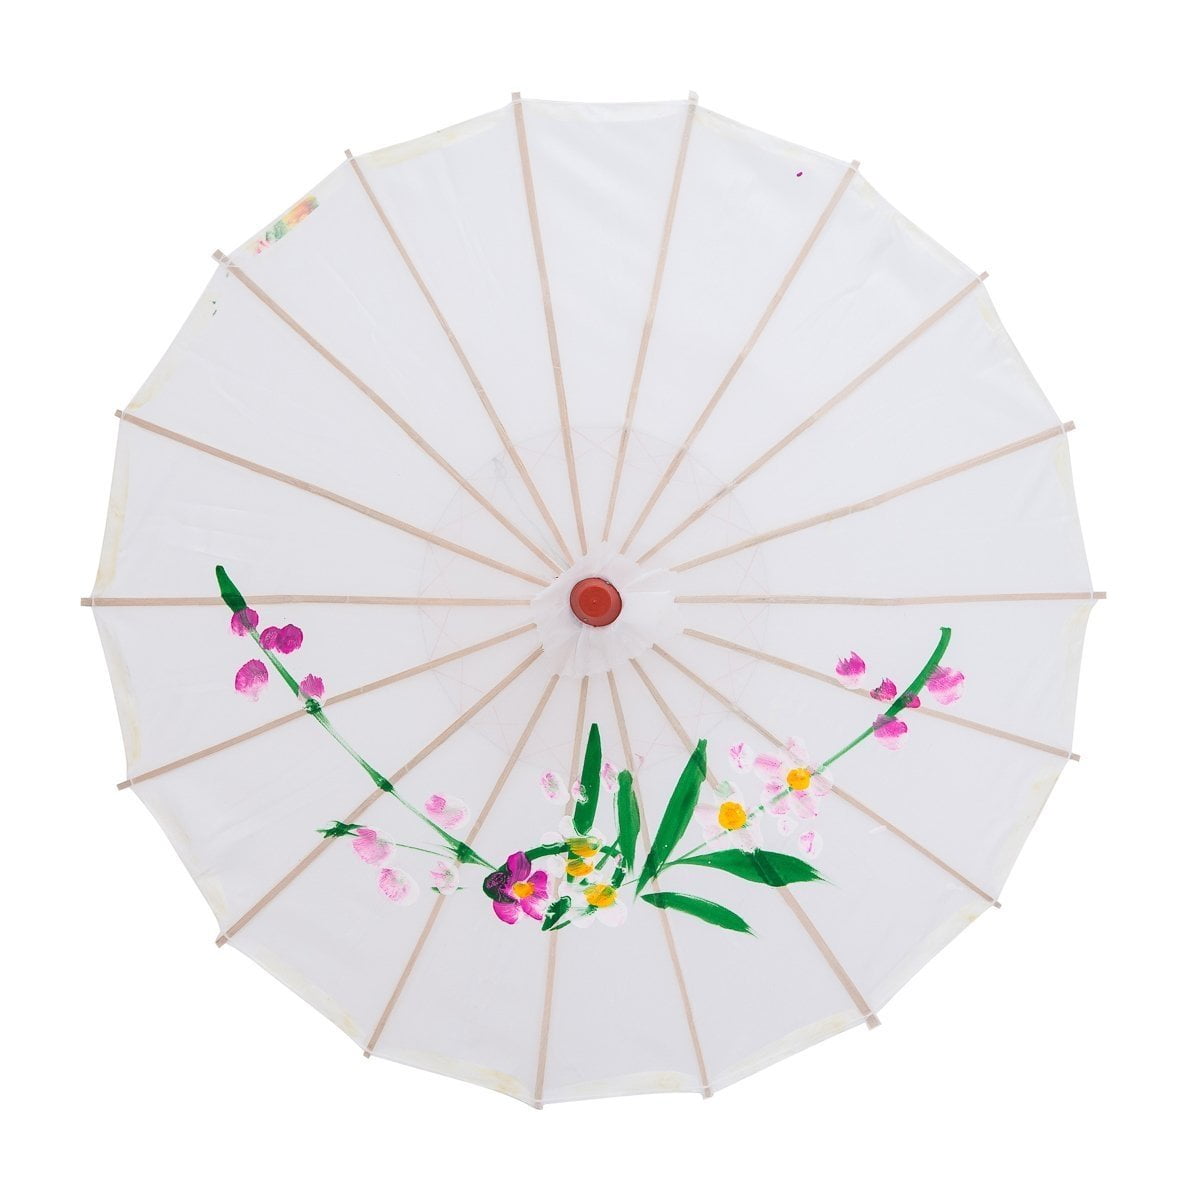 CHINESE JAPANESE S WHITE FLORAL PARASOL WEDDING DANCE FANCY GIRL UMBRELLA PARTY 